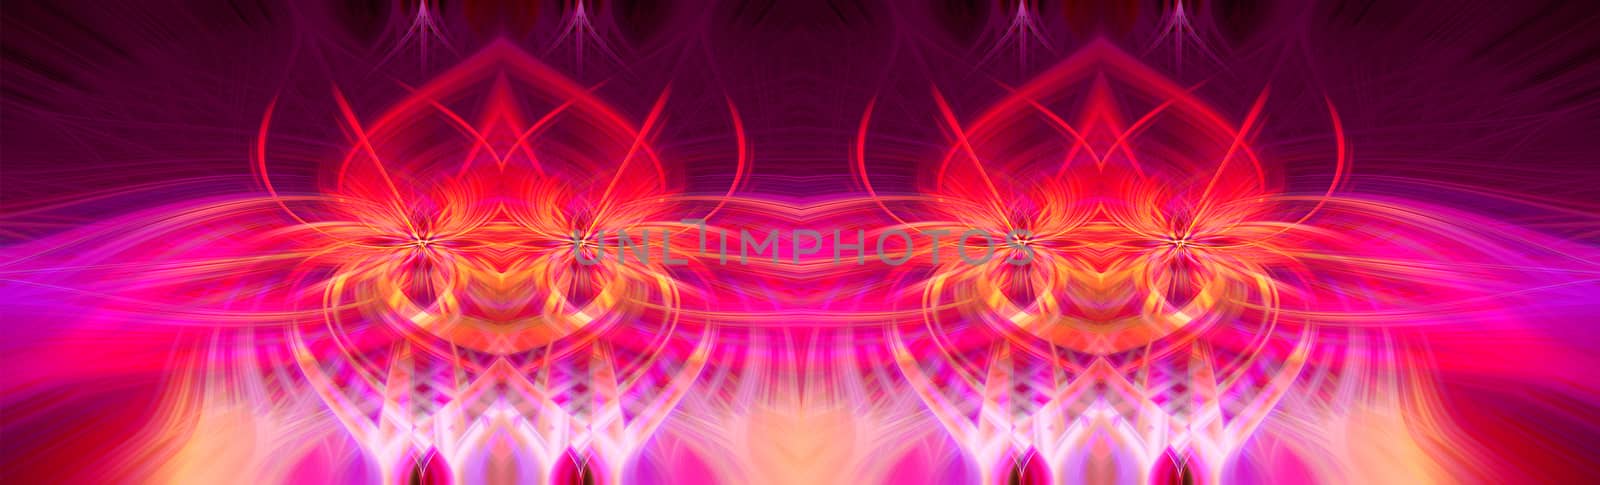 Beautiful abstract intertwined symmetrical 3d fibers forming a shape of sparkle, flame, flower, interlinked hearts. Pink, blue, maroon, orange, and purple colors. Illustration. Banner, panorama size